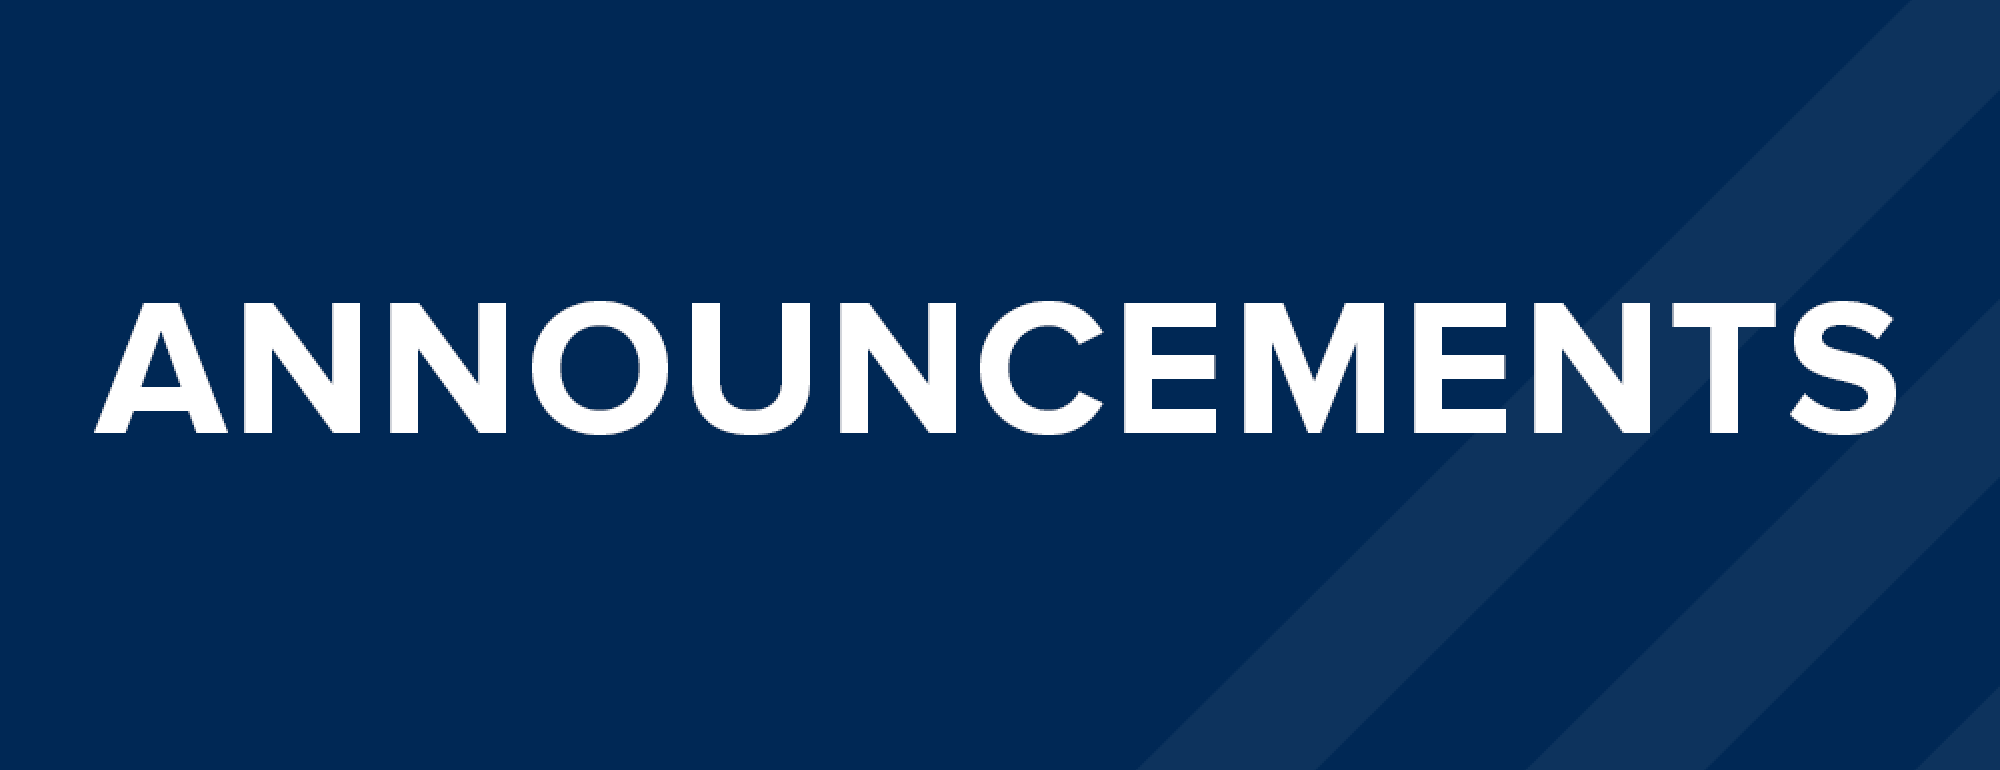 Blue background image with text that says Announcements